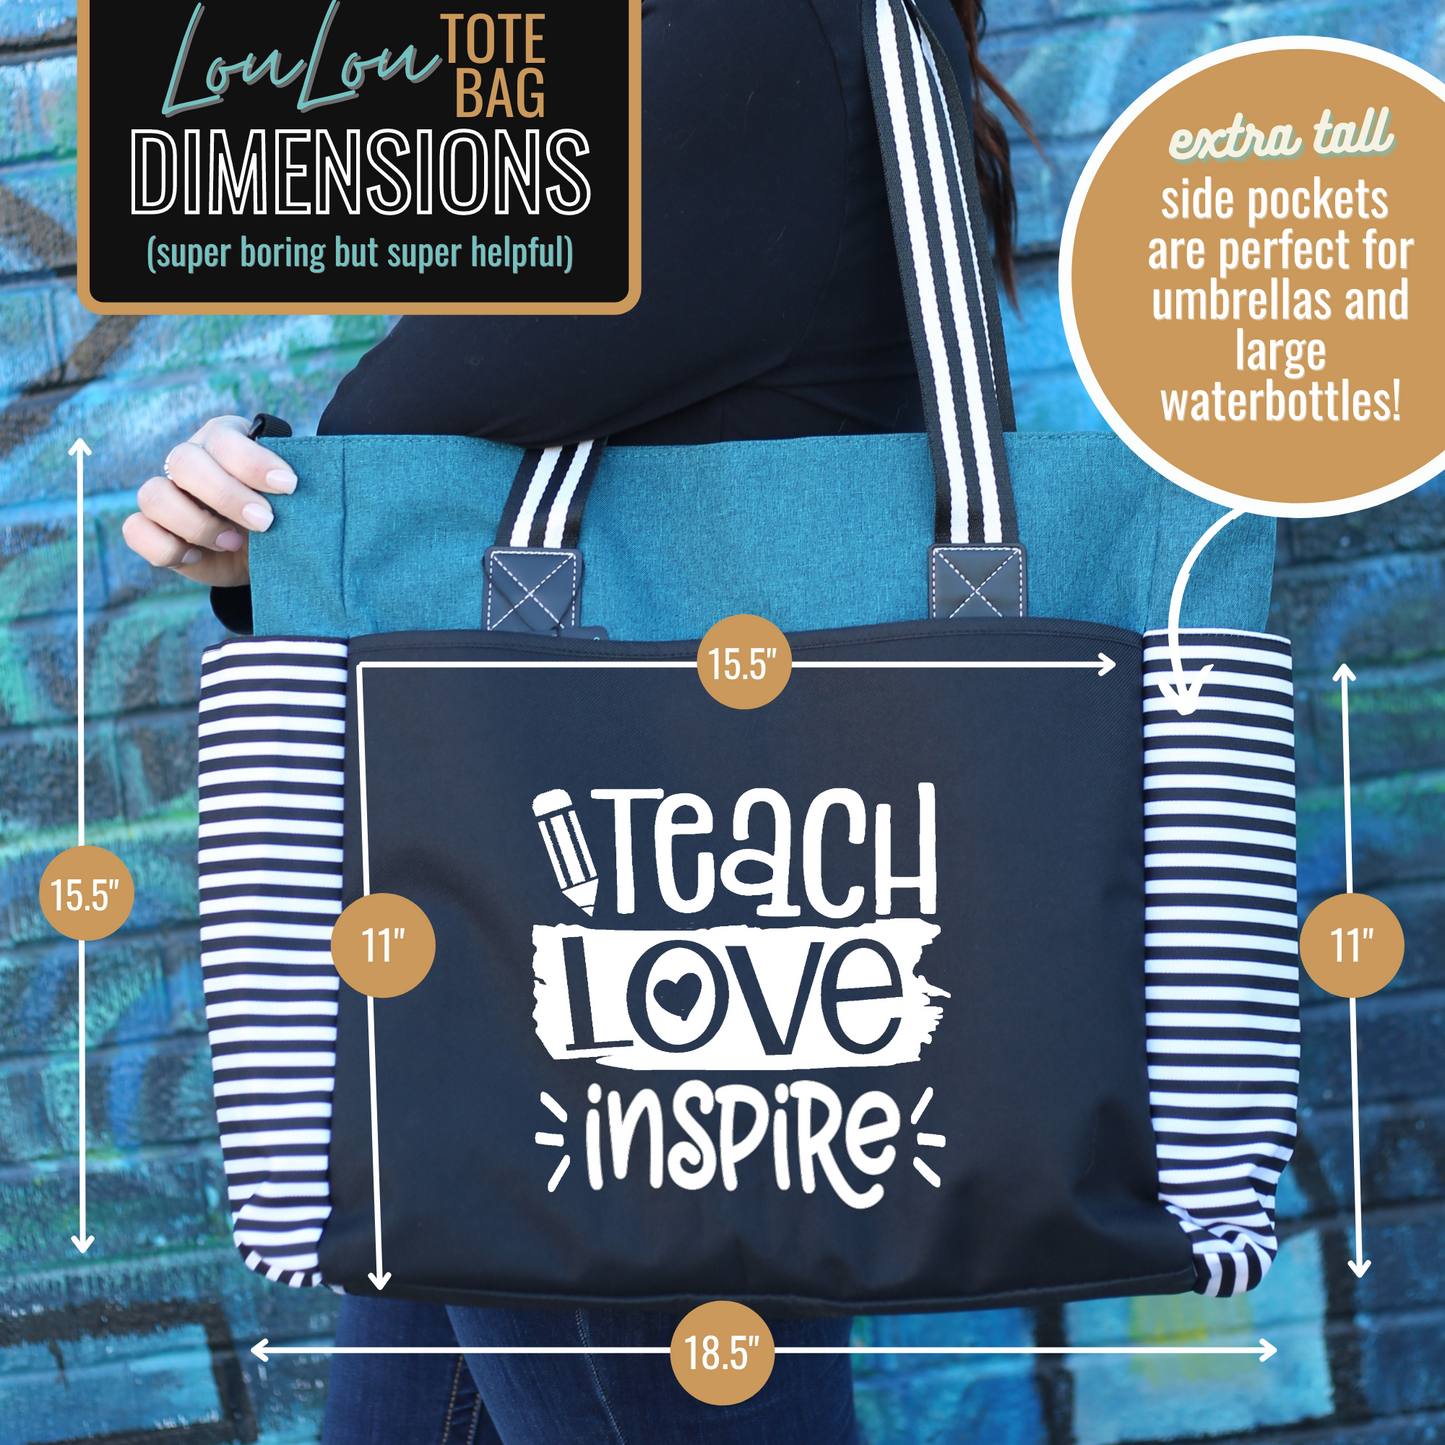 Teach Love  Inspire LouLou Teal Tote Bag for Teachers - Outlet Deal Utah